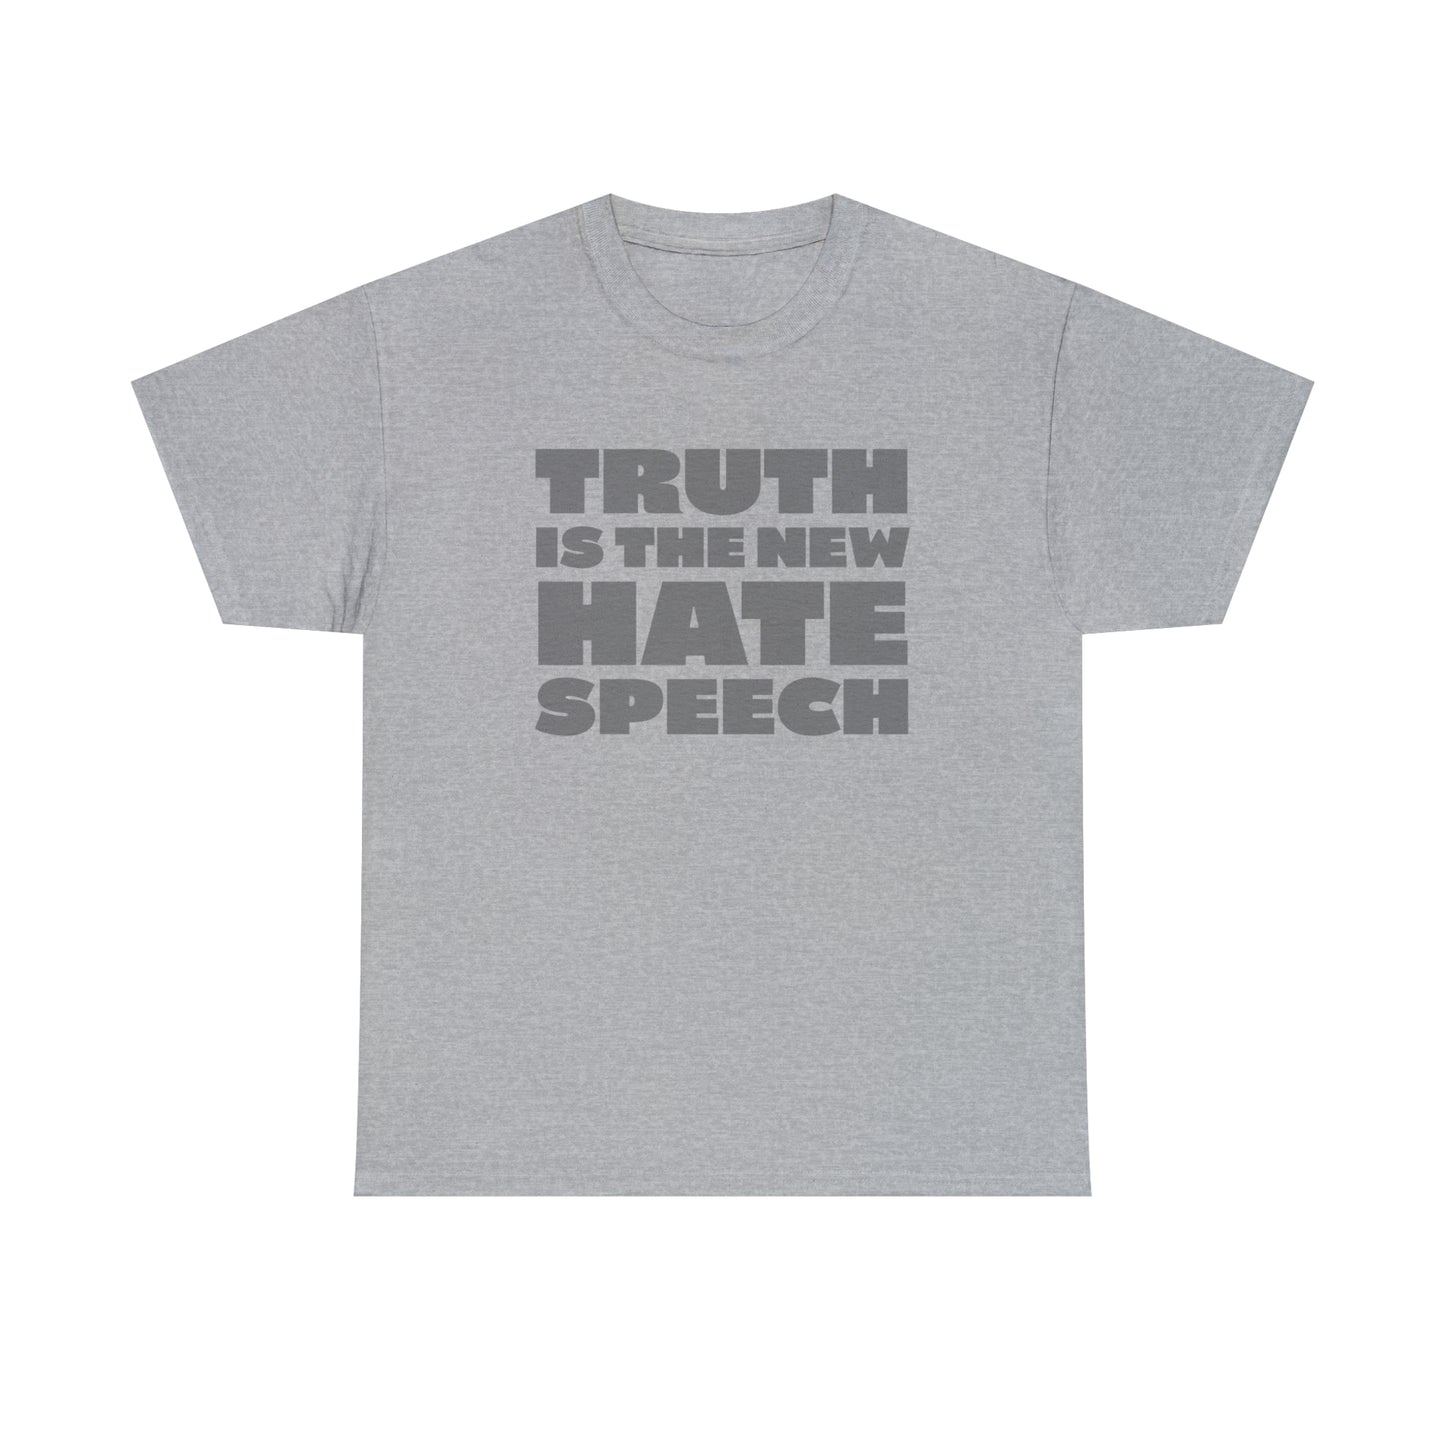 Truth T-Shirt For Hate Speech TShirt For Conservative T Shirt For Anti Woke Shirt For Right Wing Gift Idea